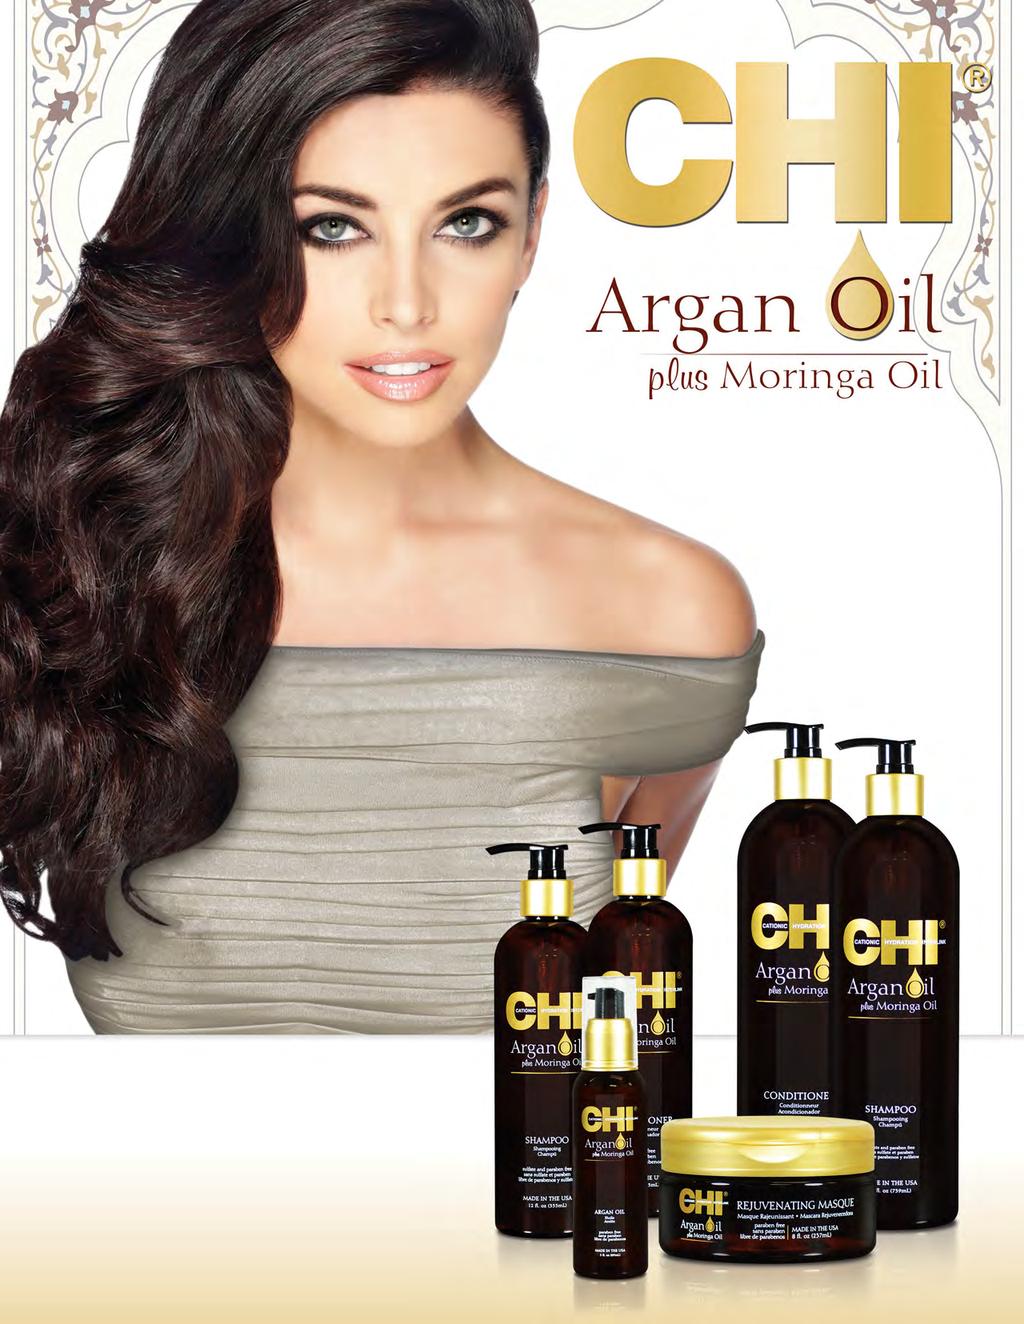 FEATURES & BENEFITS CHI Argan Oil is a luxurious hair care system featuring a unique blend of naturally derived Argan Oil plus Moringa that works to rejuvenate and hydrate dull, frizzy and damaged